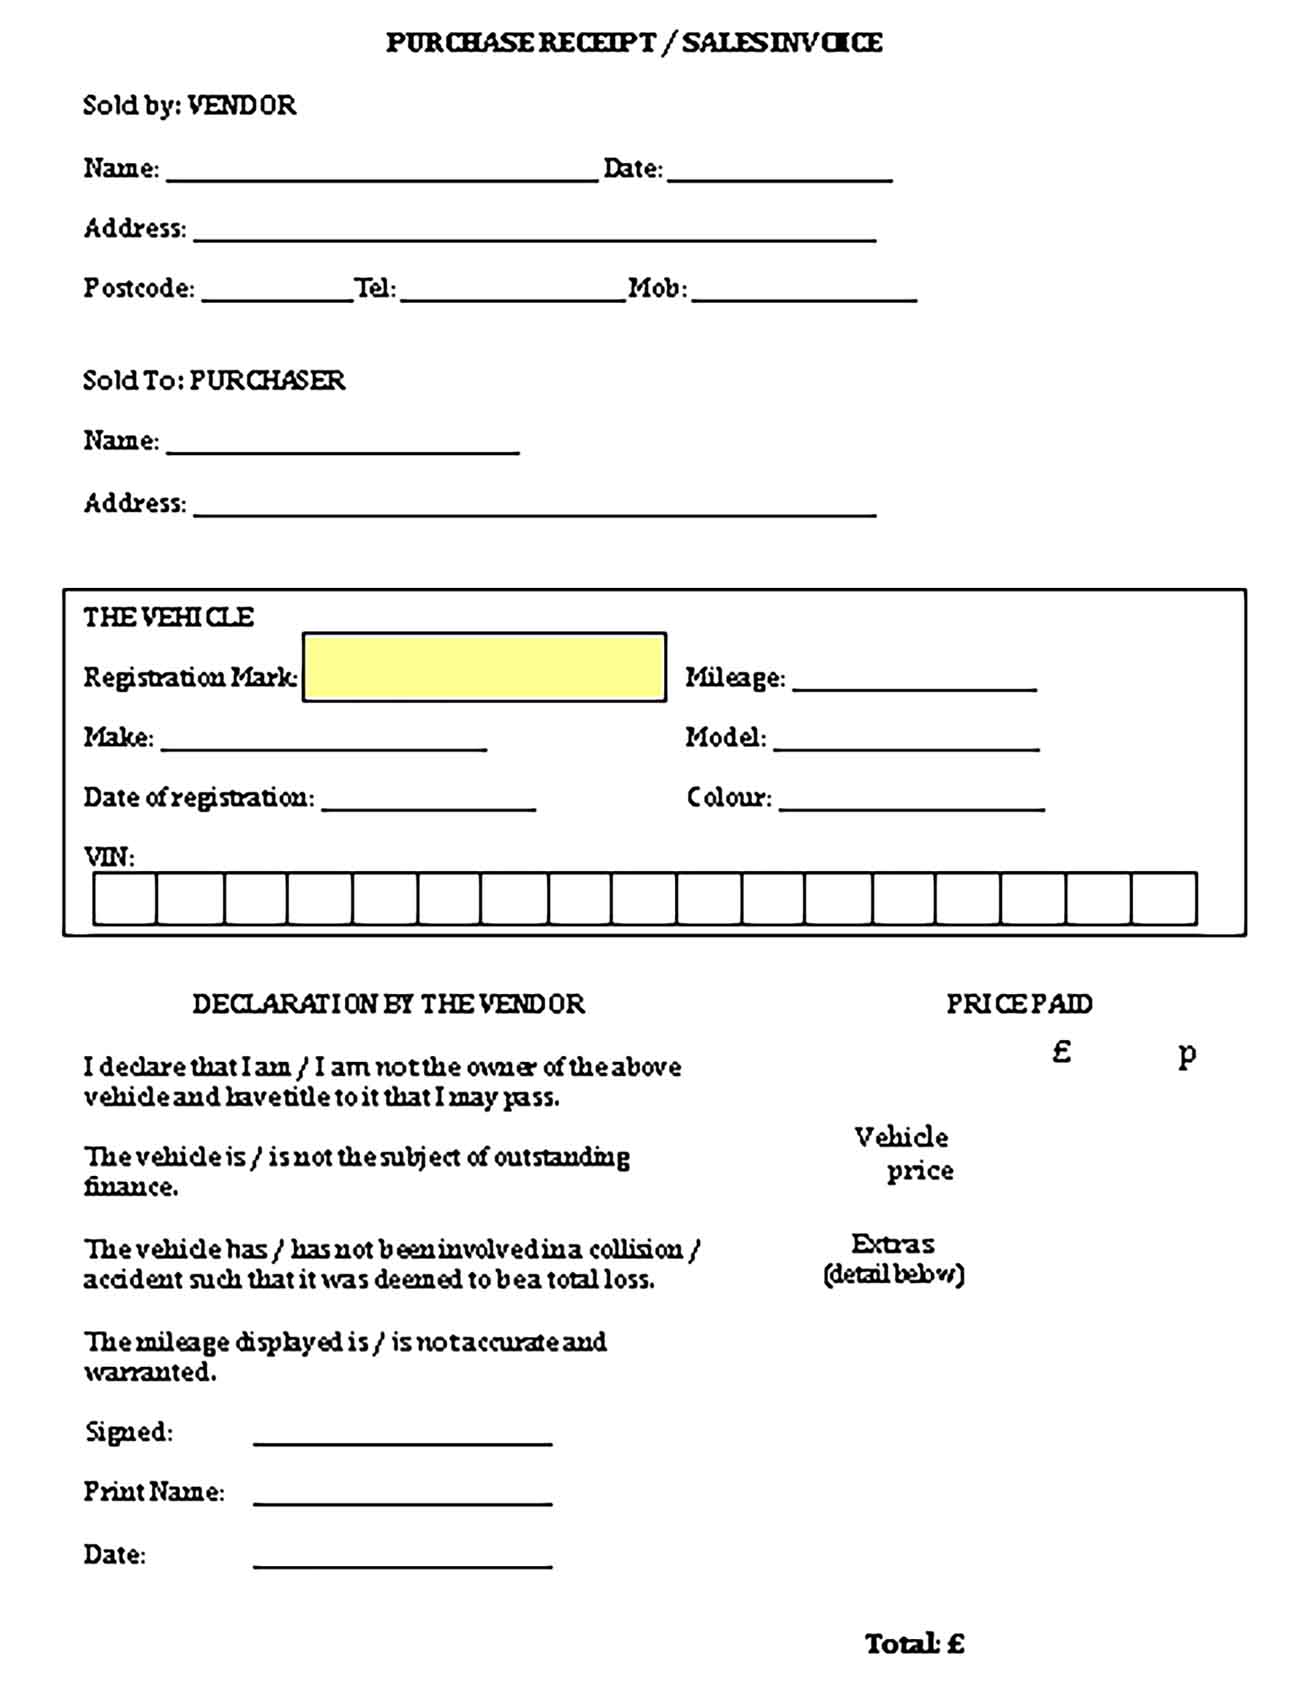 Sample Purchase Receipt Templates